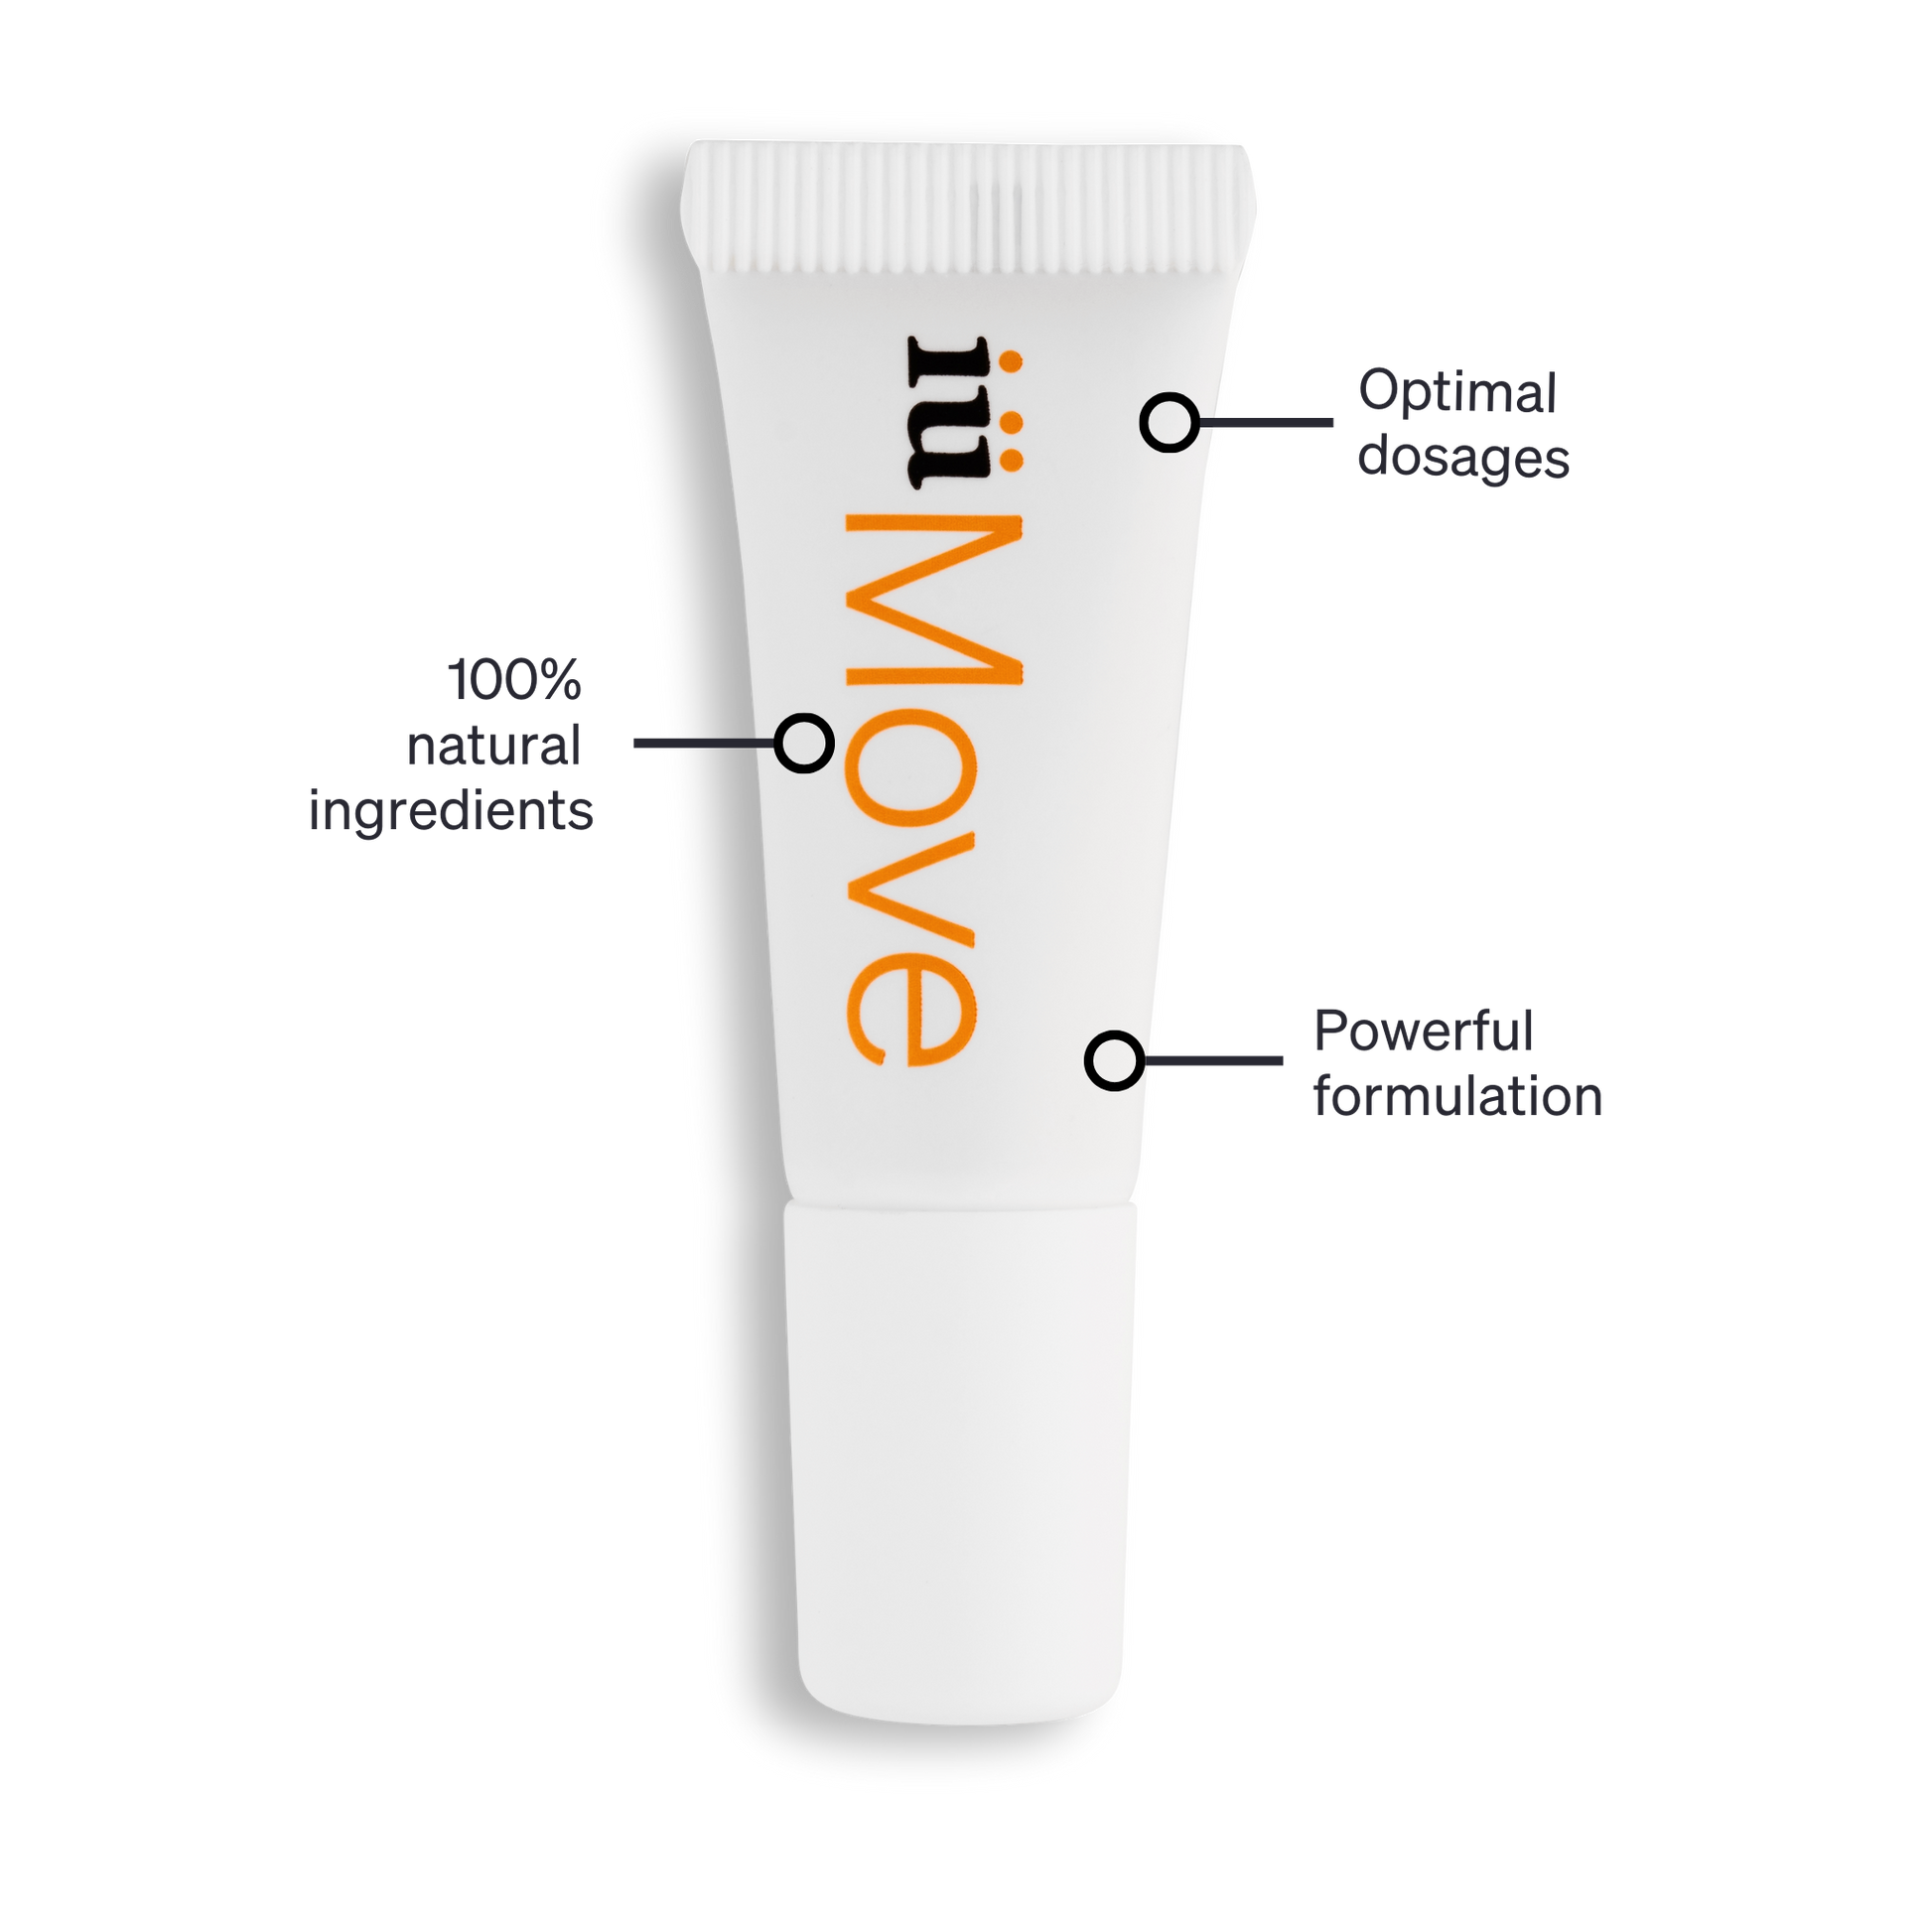 Solute tube, joint health supplement iüMove from iüLabs, optimal dosages, powerful formulations and 100% natural ingredients